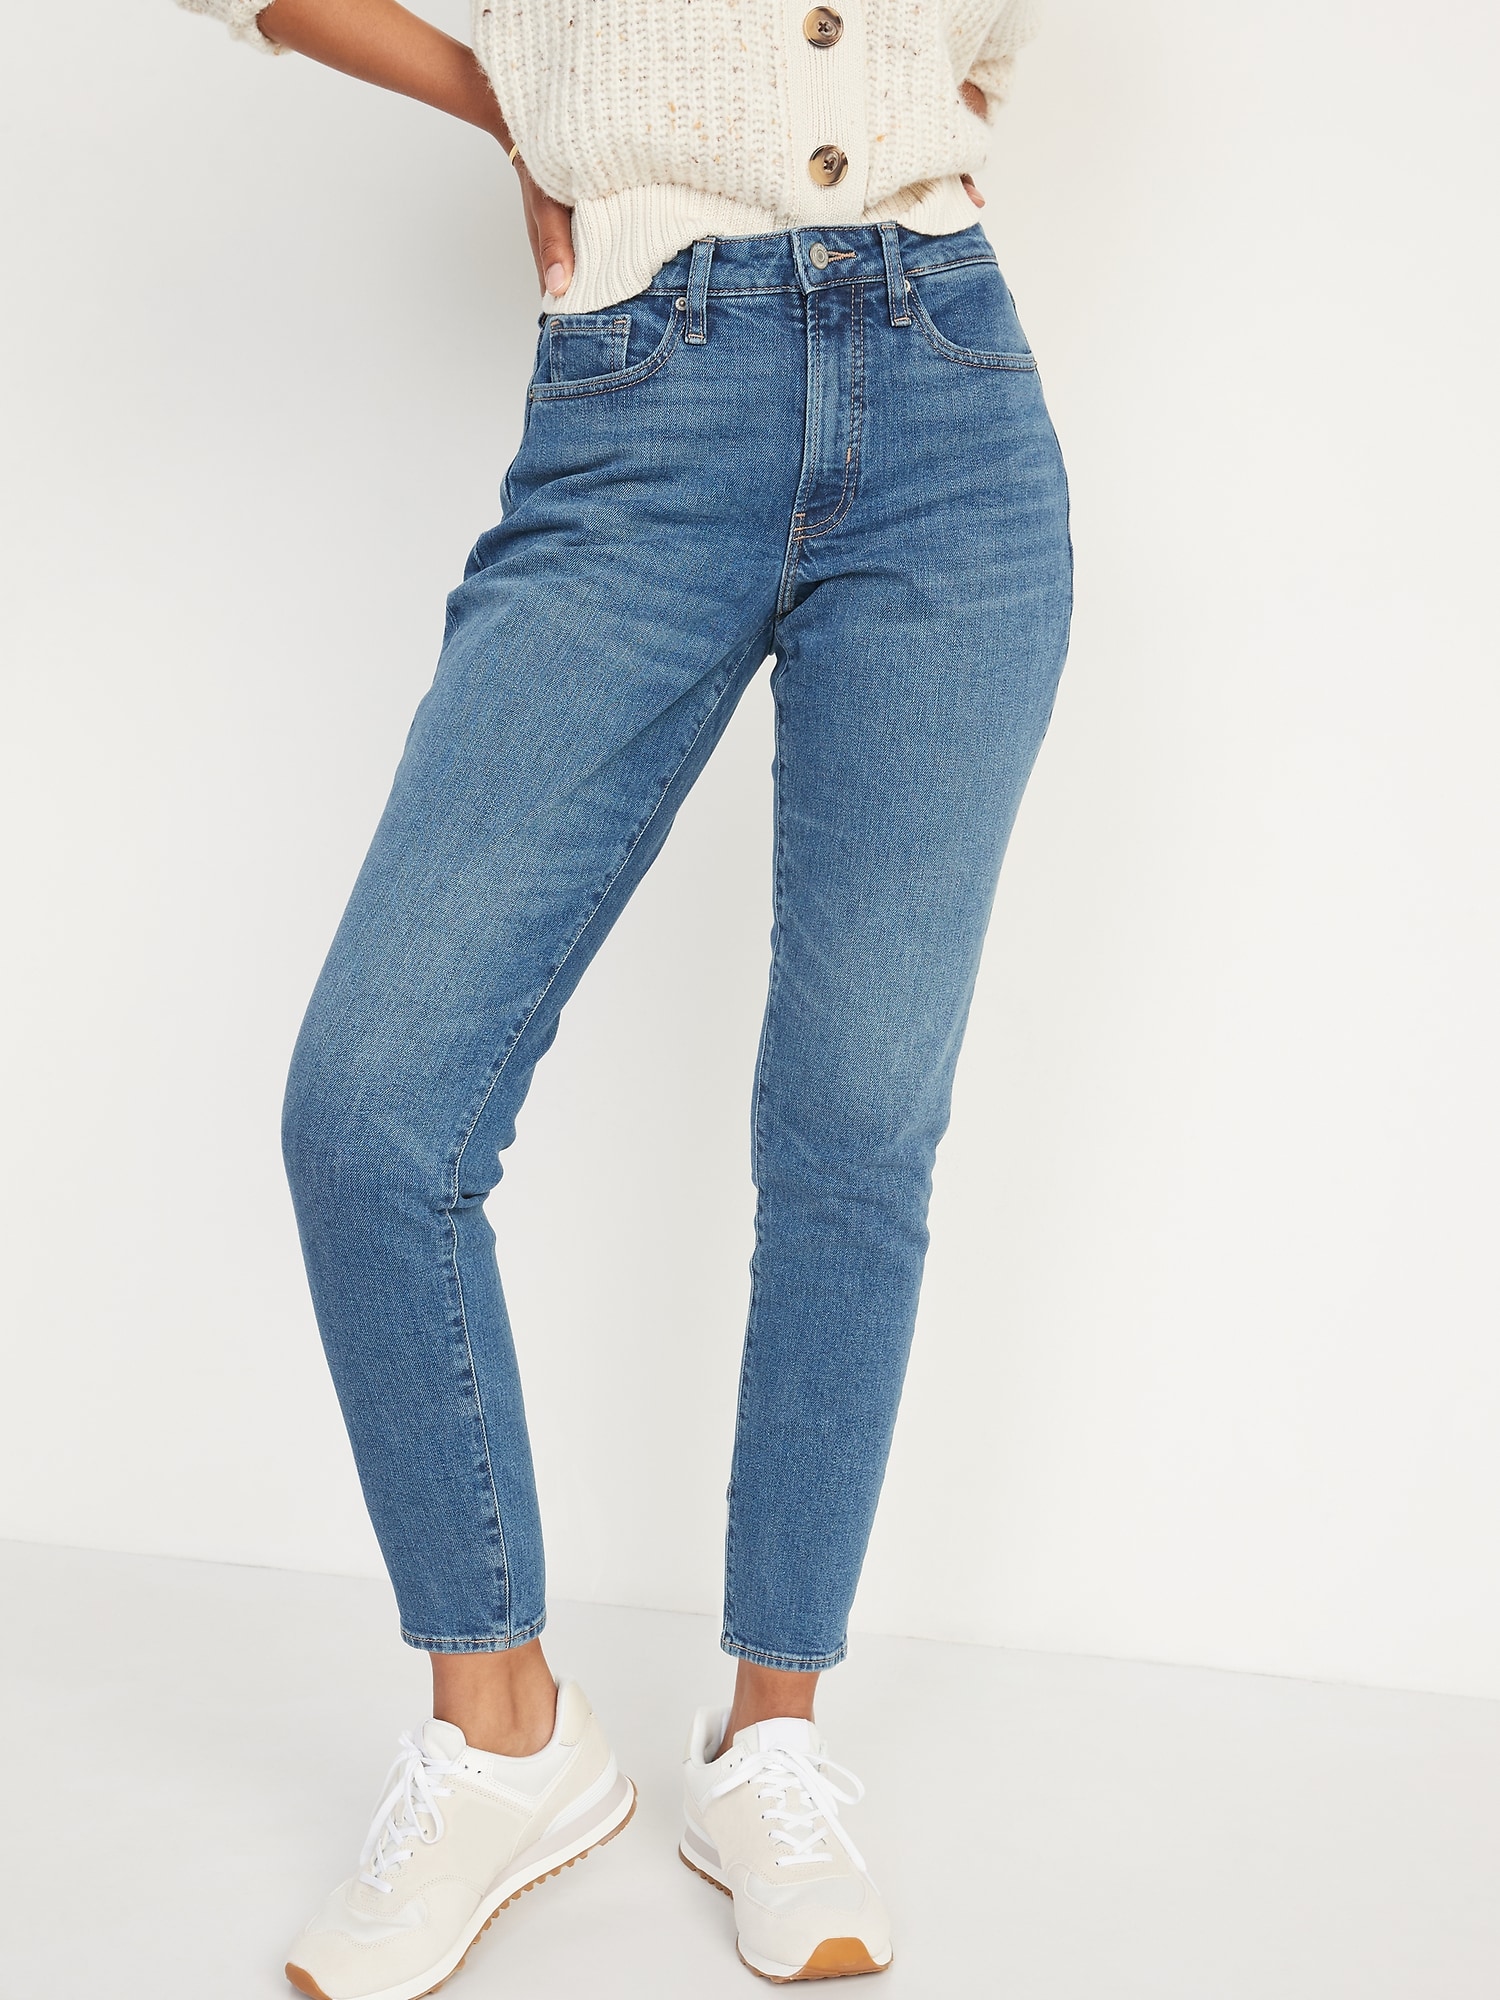 Curvy High-Waisted OG Straight Ankle Jeans for Women | Old Navy